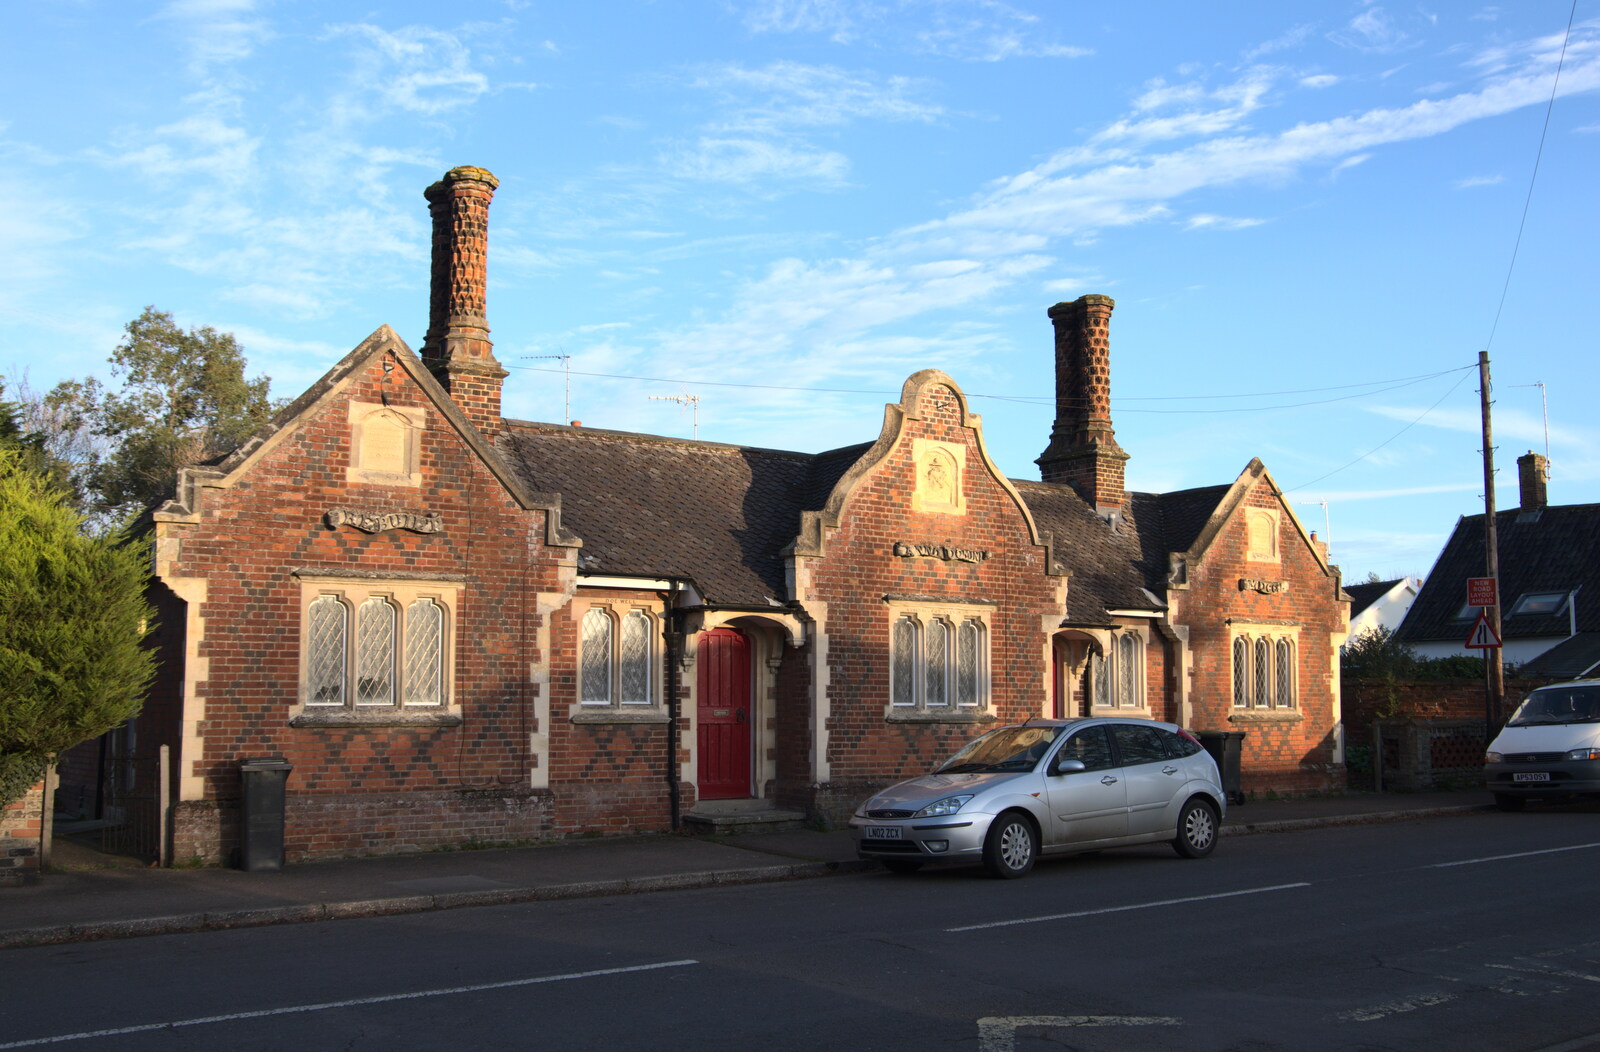 The Bedingfield Alms Houses on Lambseth Street from The Dereliction of Eye, Suffolk - 22nd November 2020